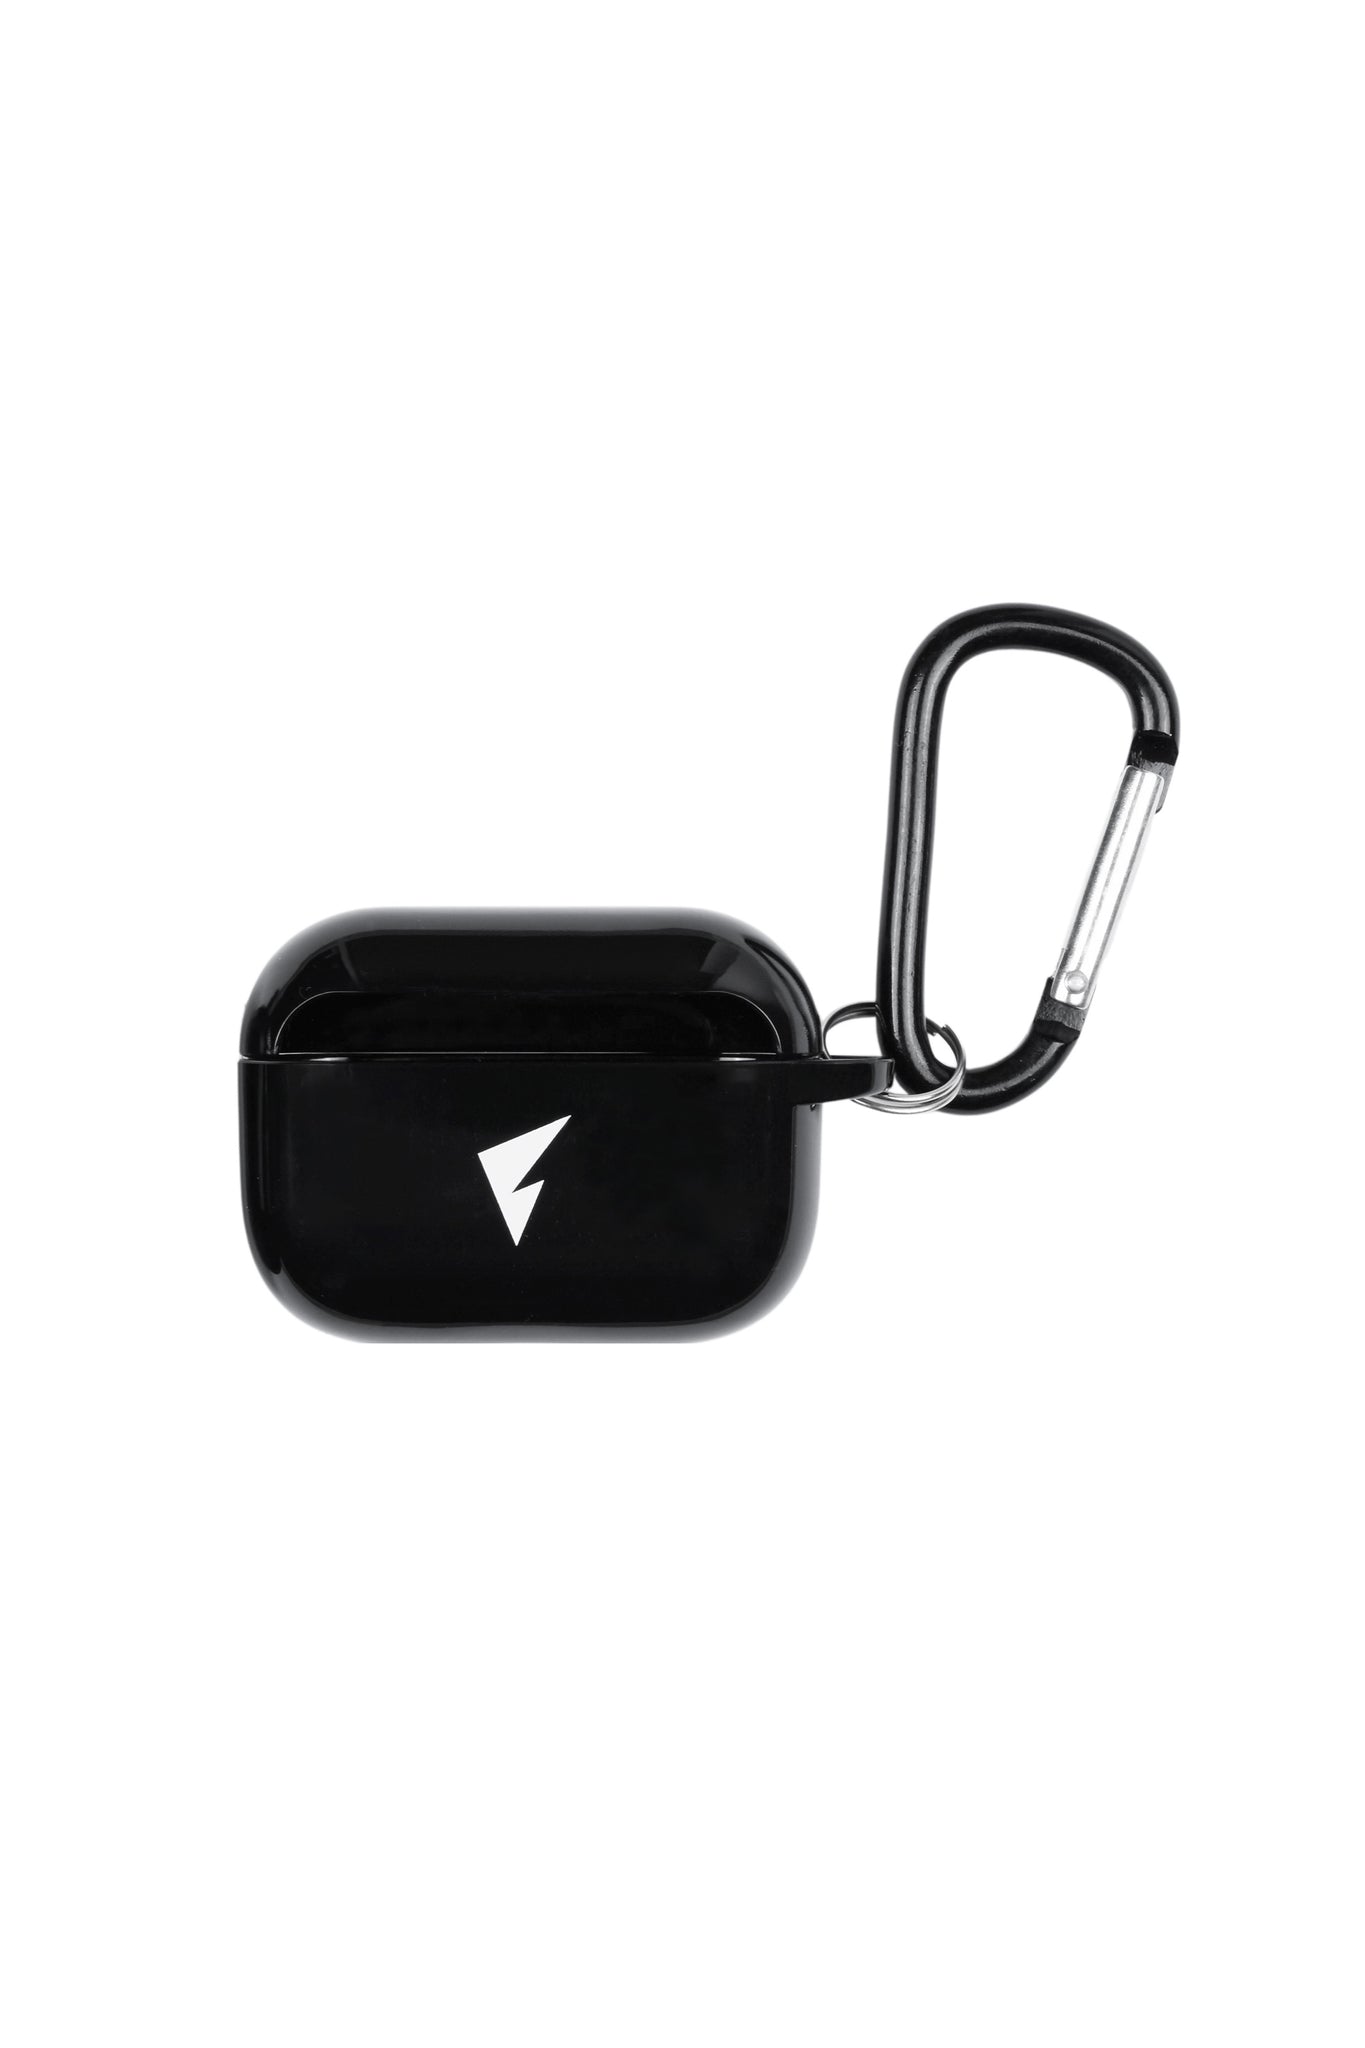 FENNEL LOGO AirPods case / AirPods Pro case